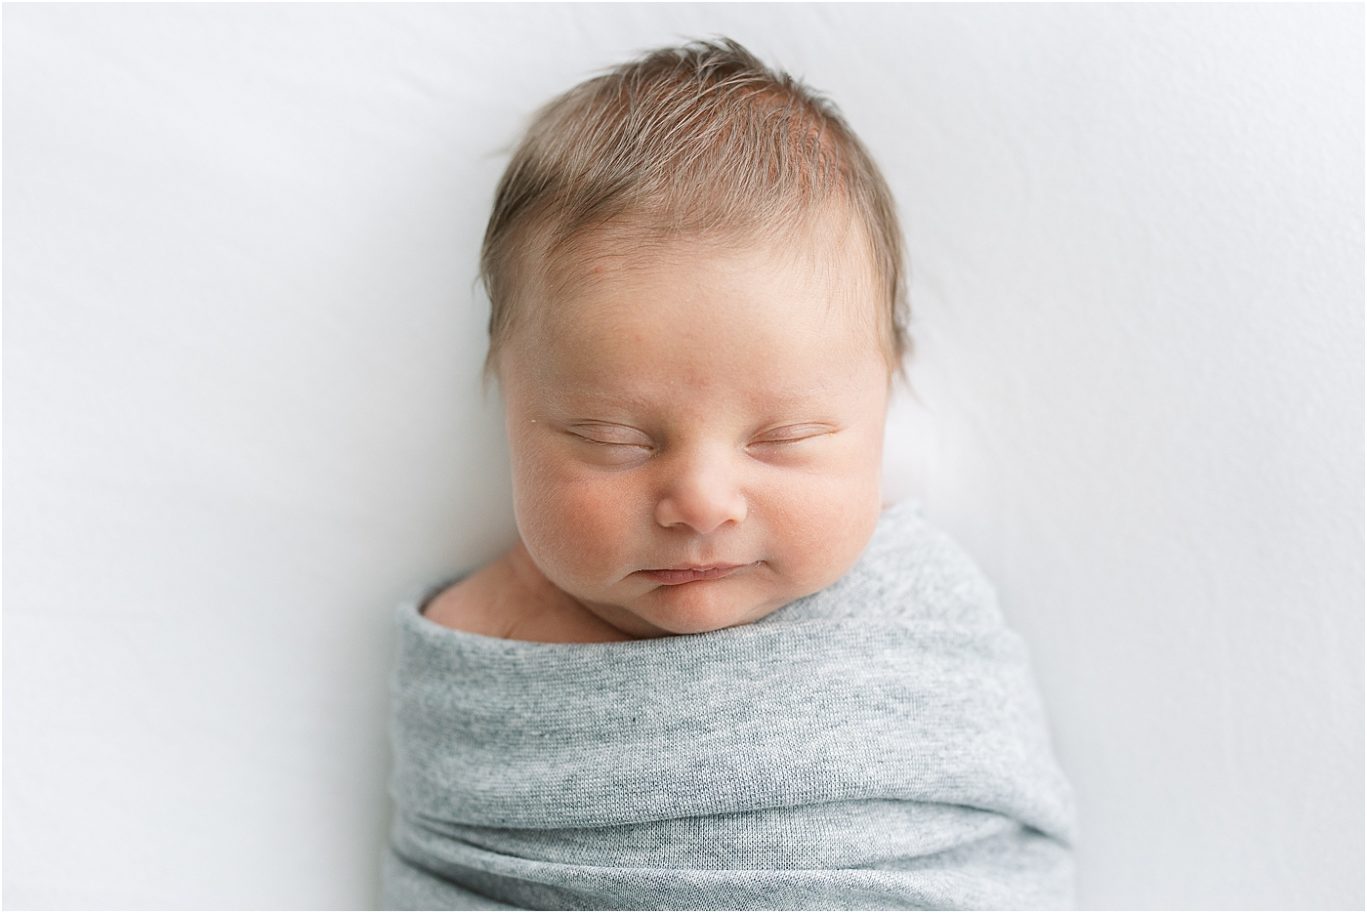 Baby boy sleeping and swaddled for his newborn photos. Photo by Lindsay Konopa Photography.